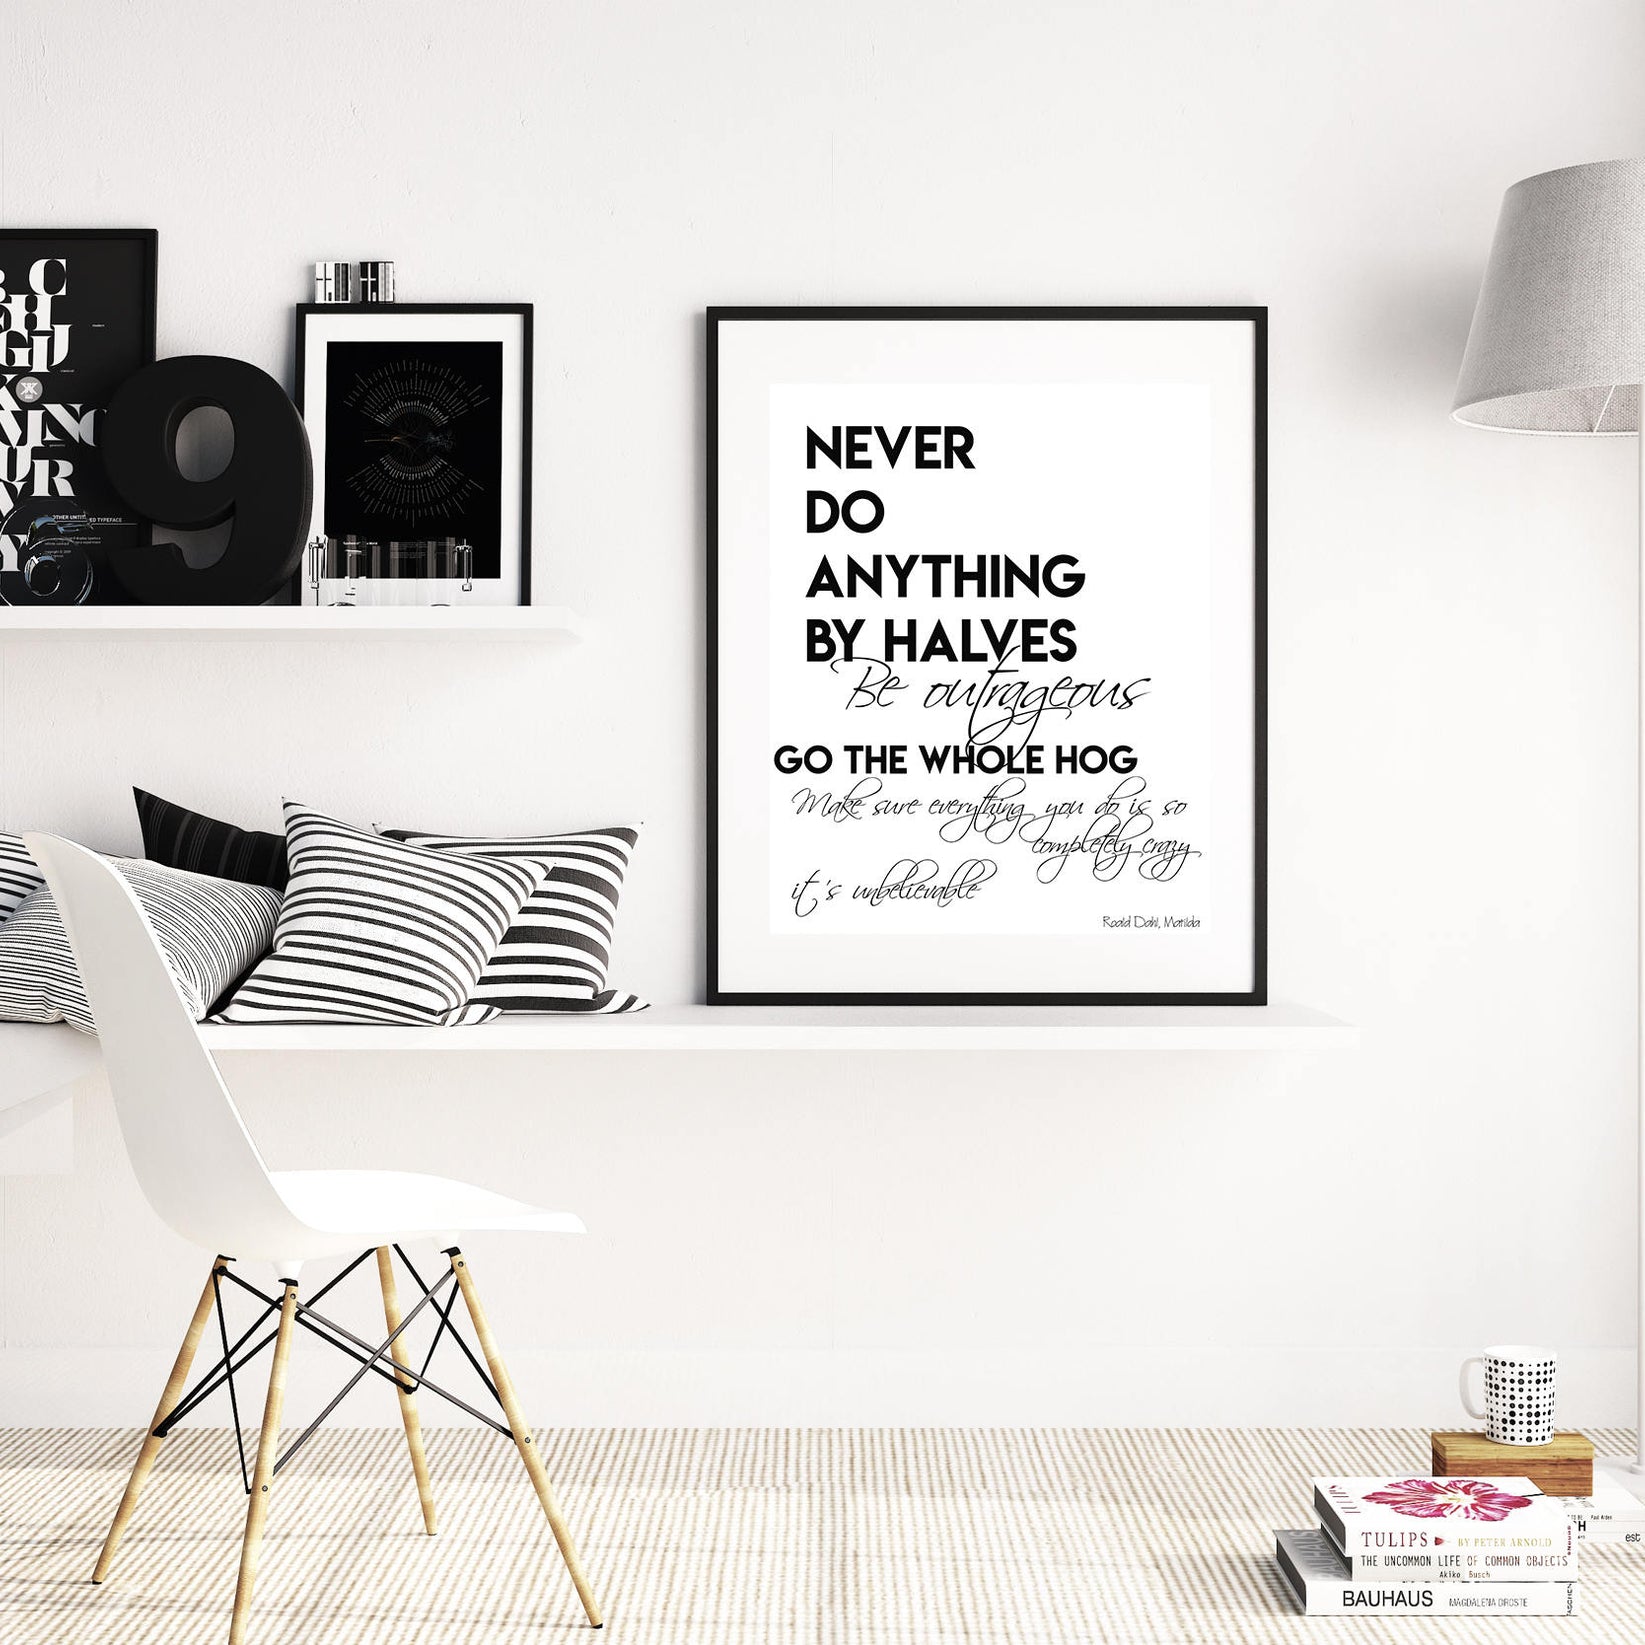 Roald Dahl MATILDA Wall Art Print in Black & White, Never Do Anything By Halves Quote for Kid's Room